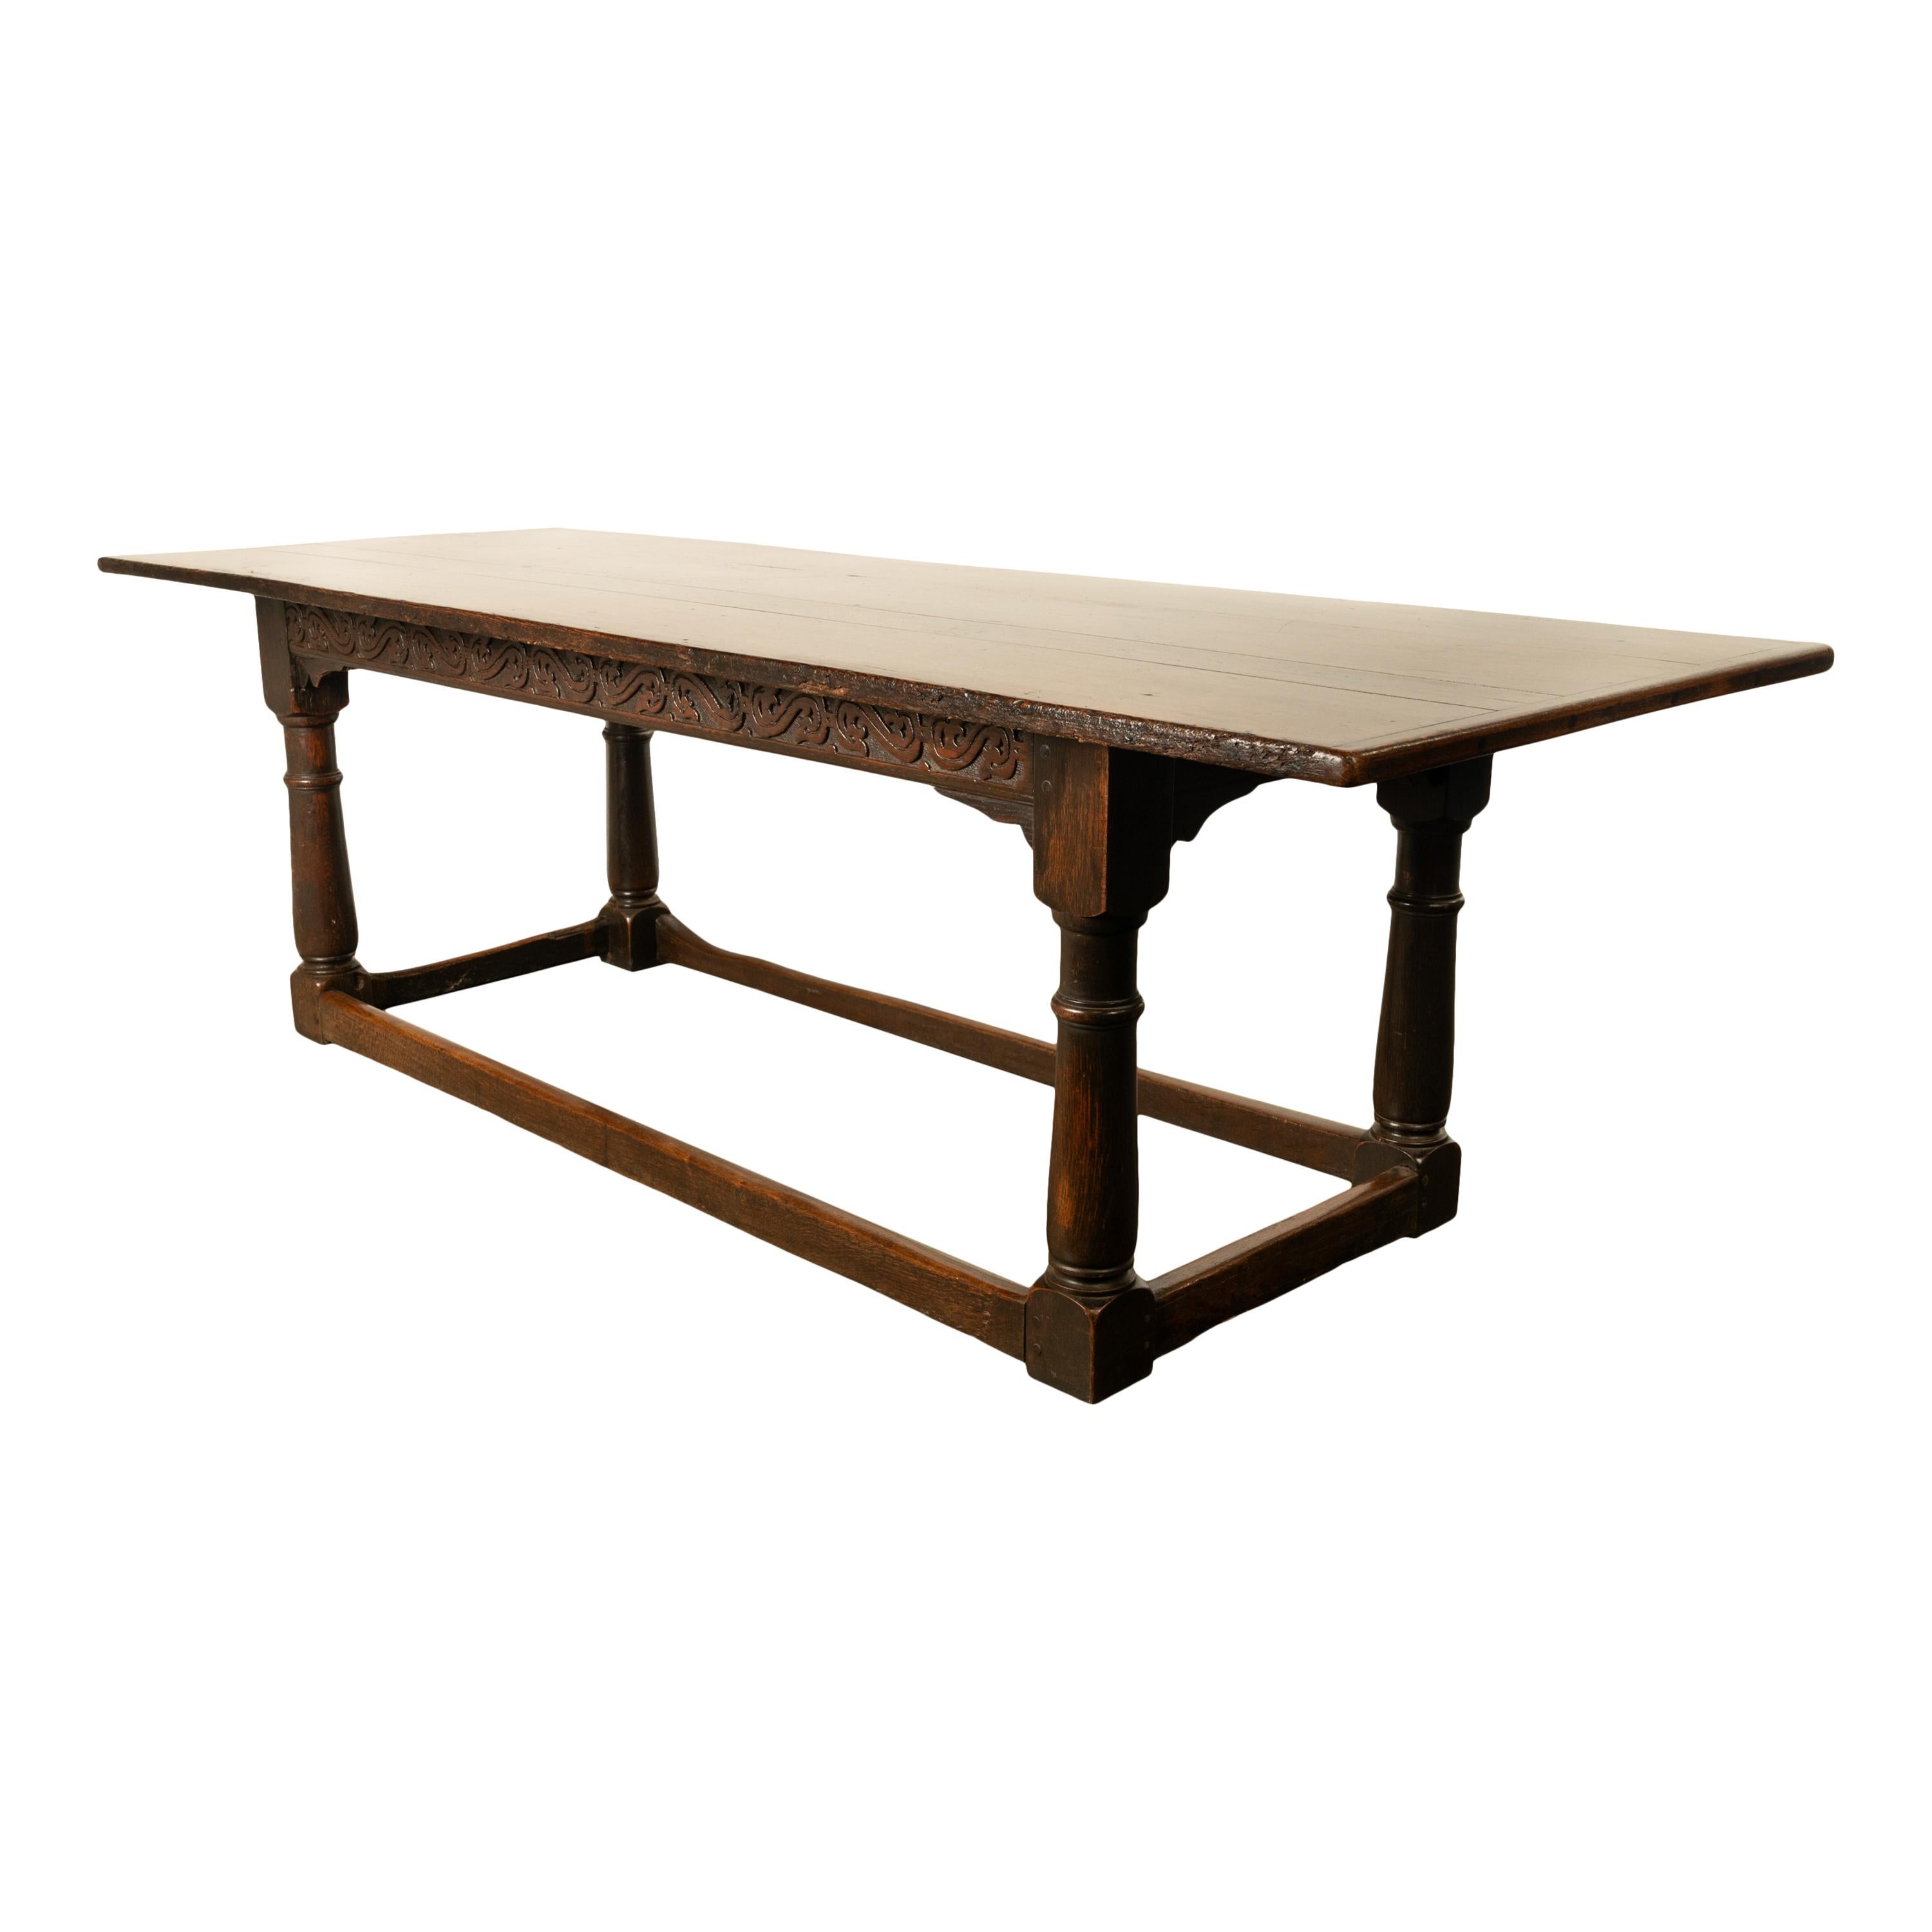 Antique English carved oak refectory dining table, circa 1680.
A fine and large oak refectory table from the reign of King Charles II and the restoration of the monarcht after the English Civial War. The planked top sits above a carved skirt the